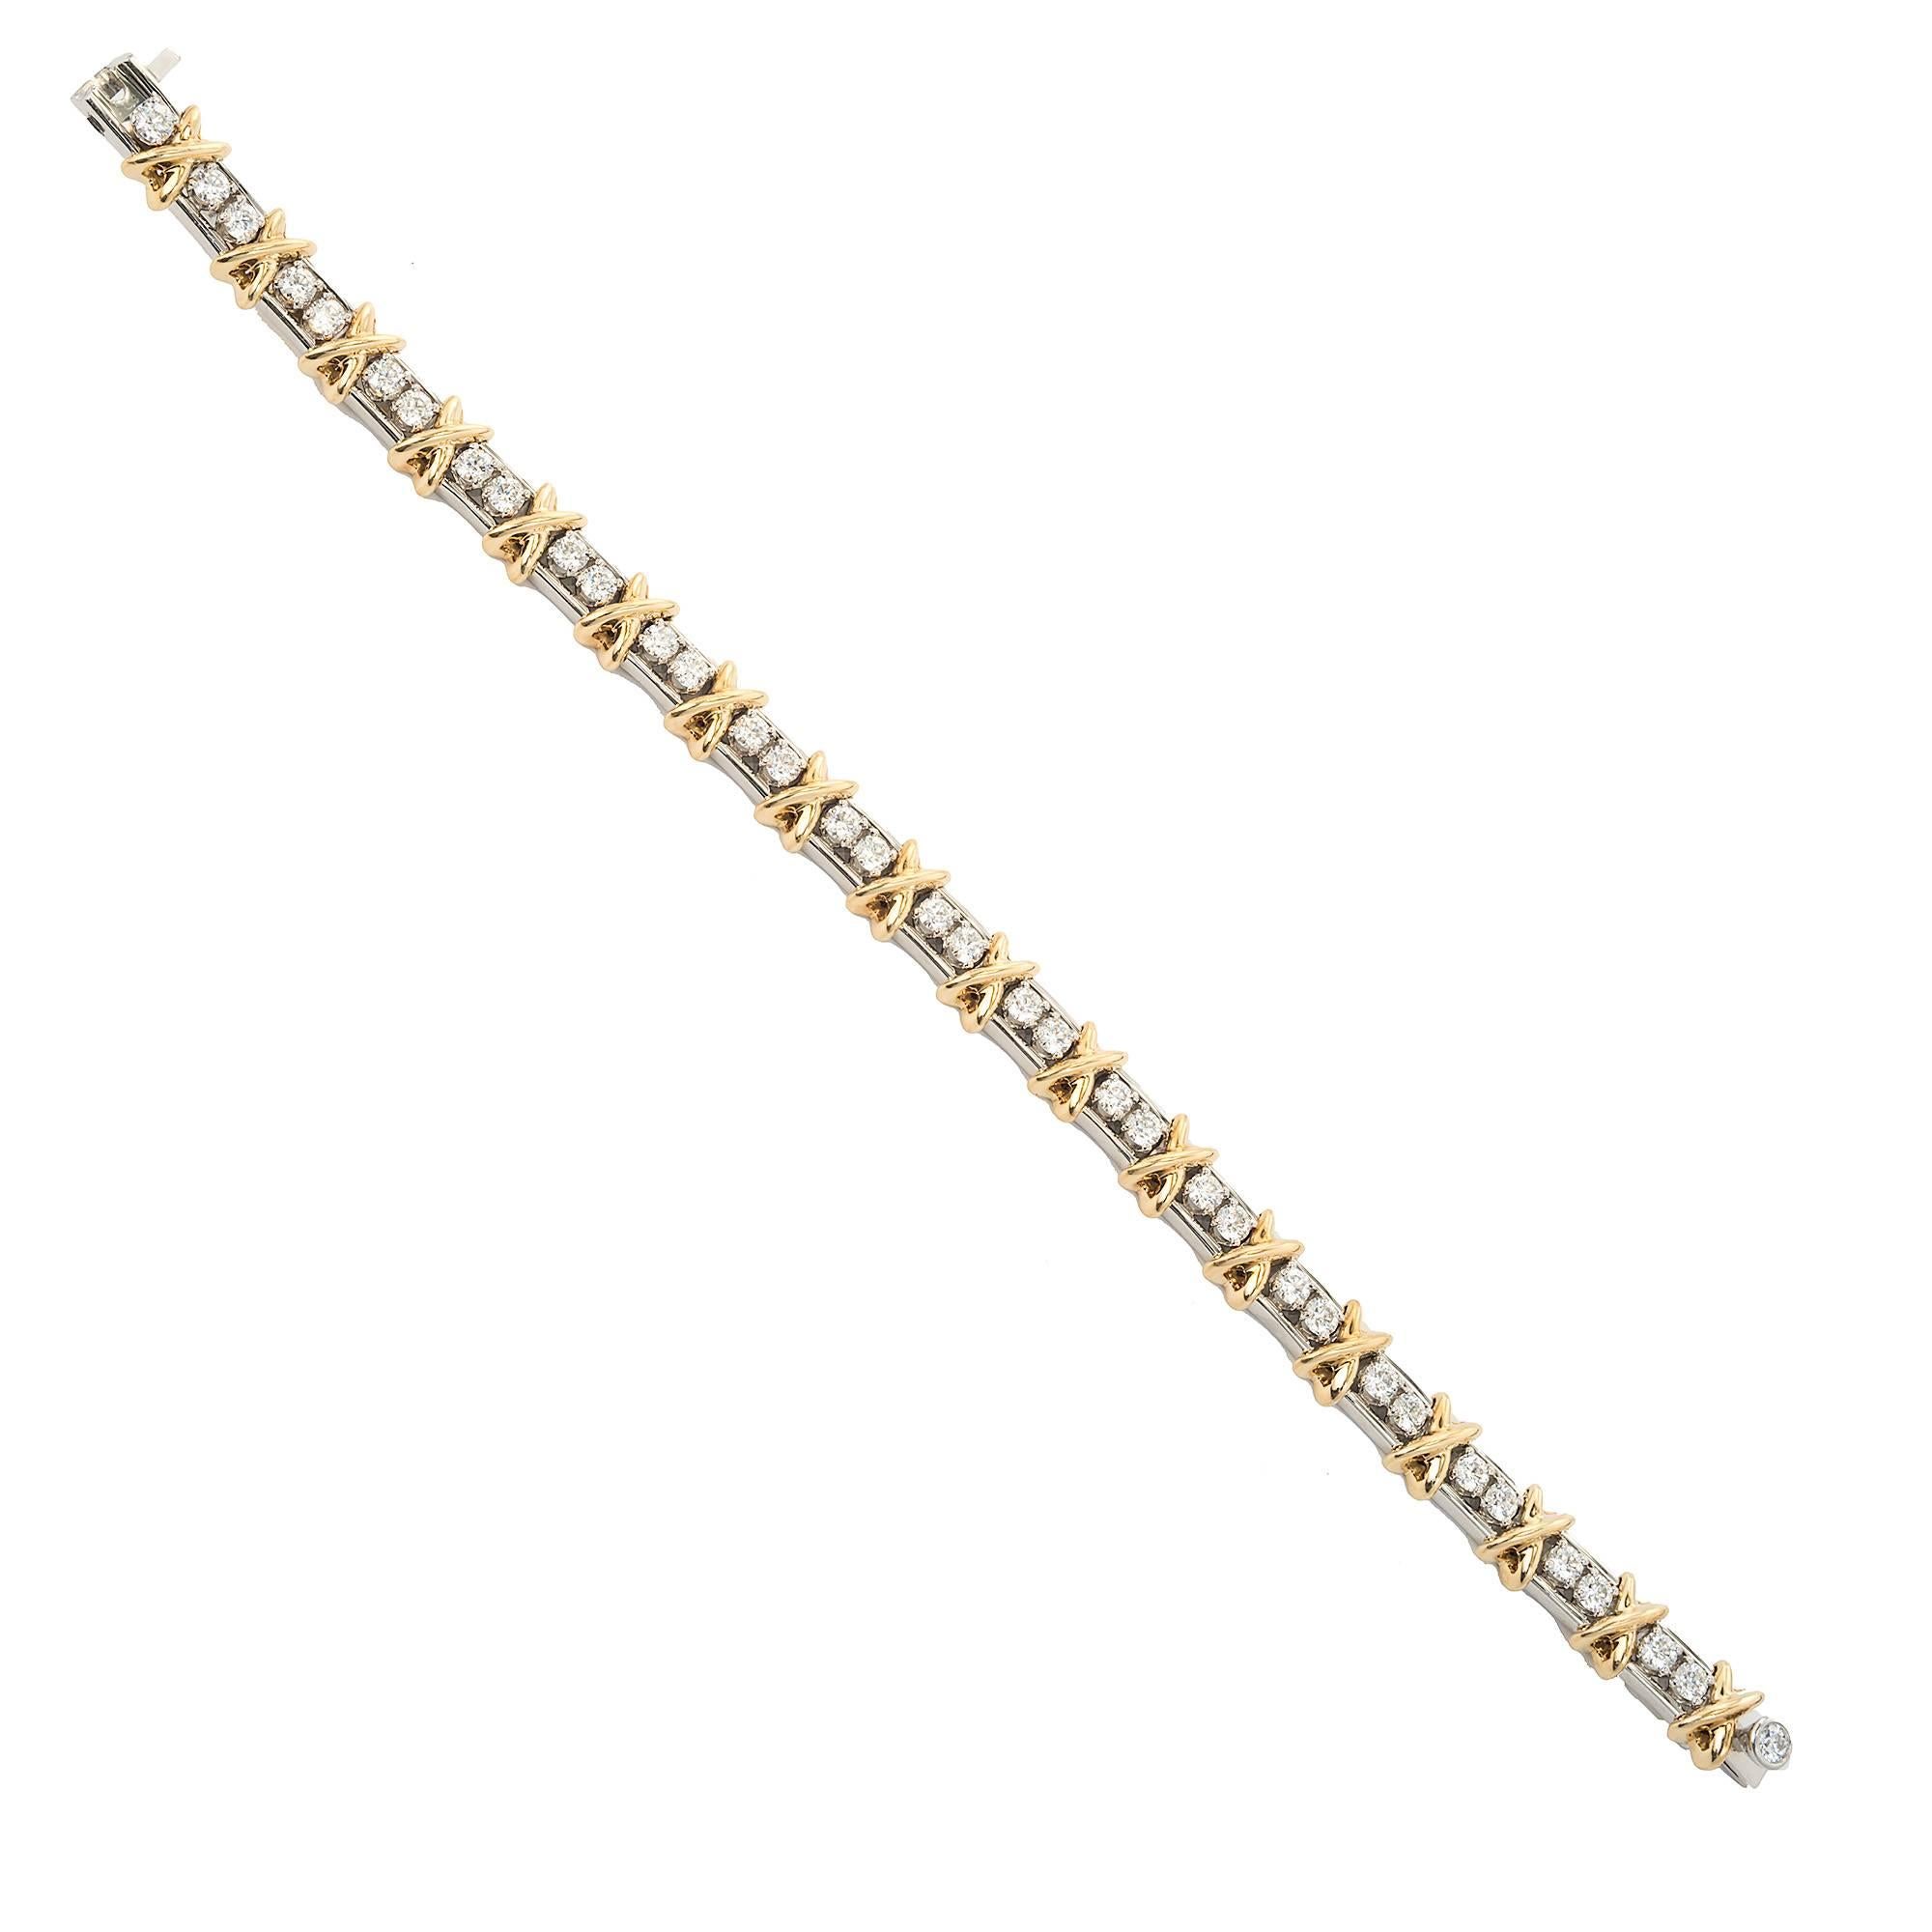 Tiffany & Co Schlumberger 36 Stone Diamond Bracelet in Platinum and 18K yellow gold with the iconic X pattern. Ideal full cut diamonds 2.95 carat F VS

36 round full cut diamonds F VS approximate 2.95 carats
Platinum
18k Yellow Gold
Tested: Platinum